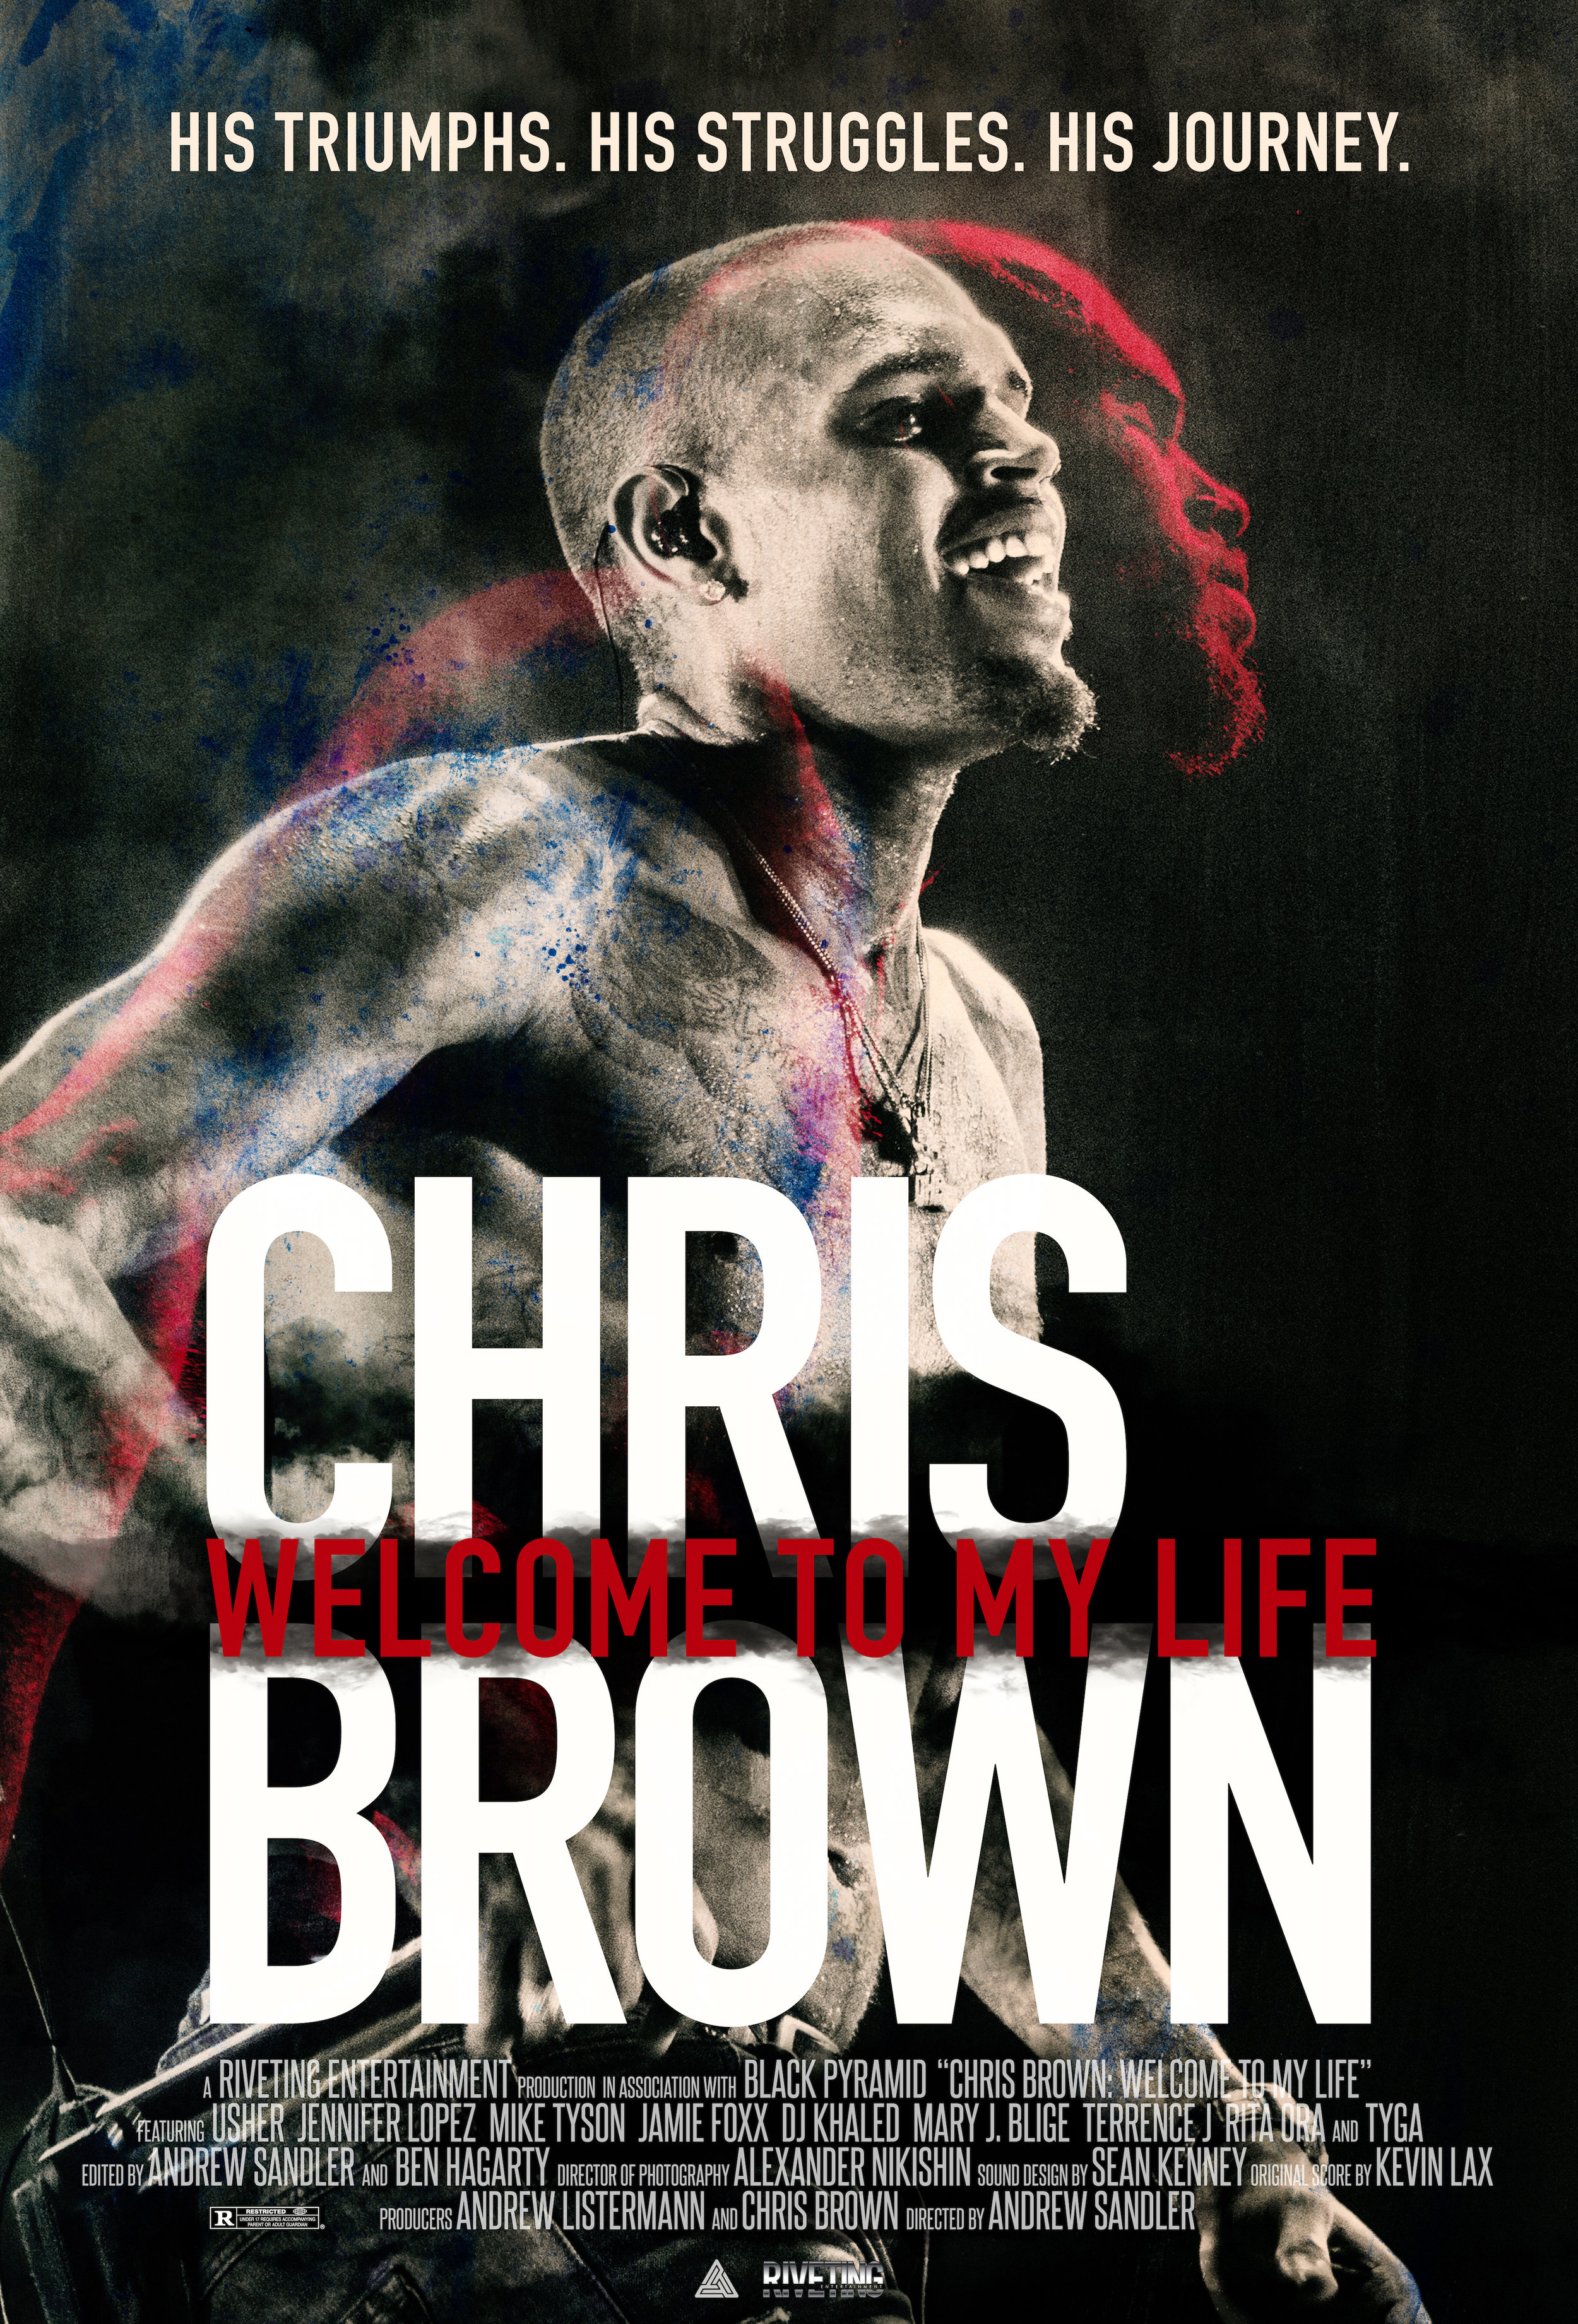  WELCOME TO MY LIFE - OFFICIAL CHRIS BROWN DOCUMENTARY 